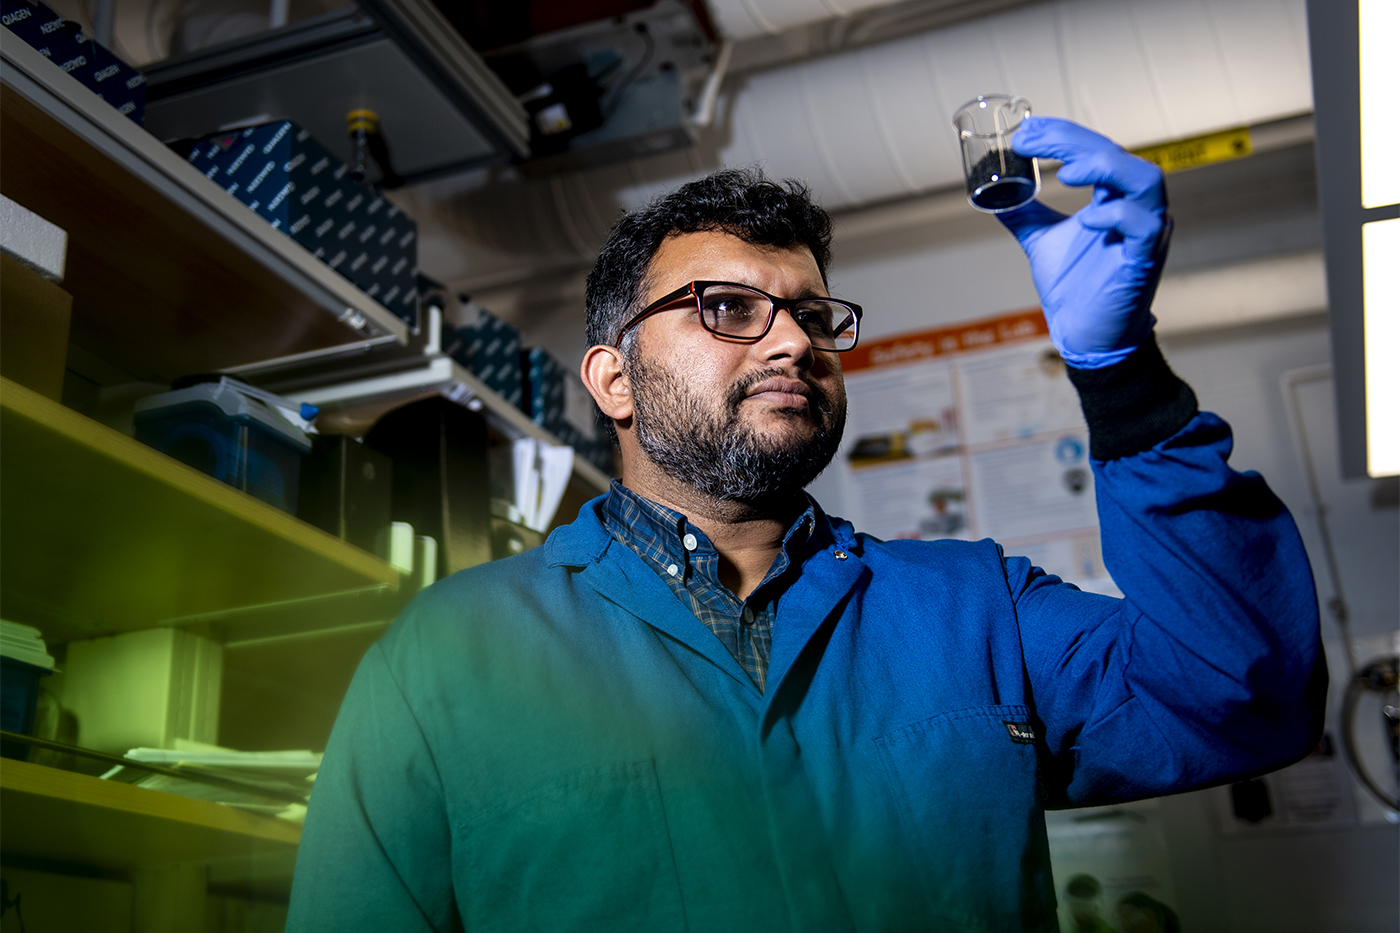 Northeastern professor Ameet Pinto wins Paul L. Busch award to make bacteria monitoring easier and cheaper in engineered water systems - News@Northeastern